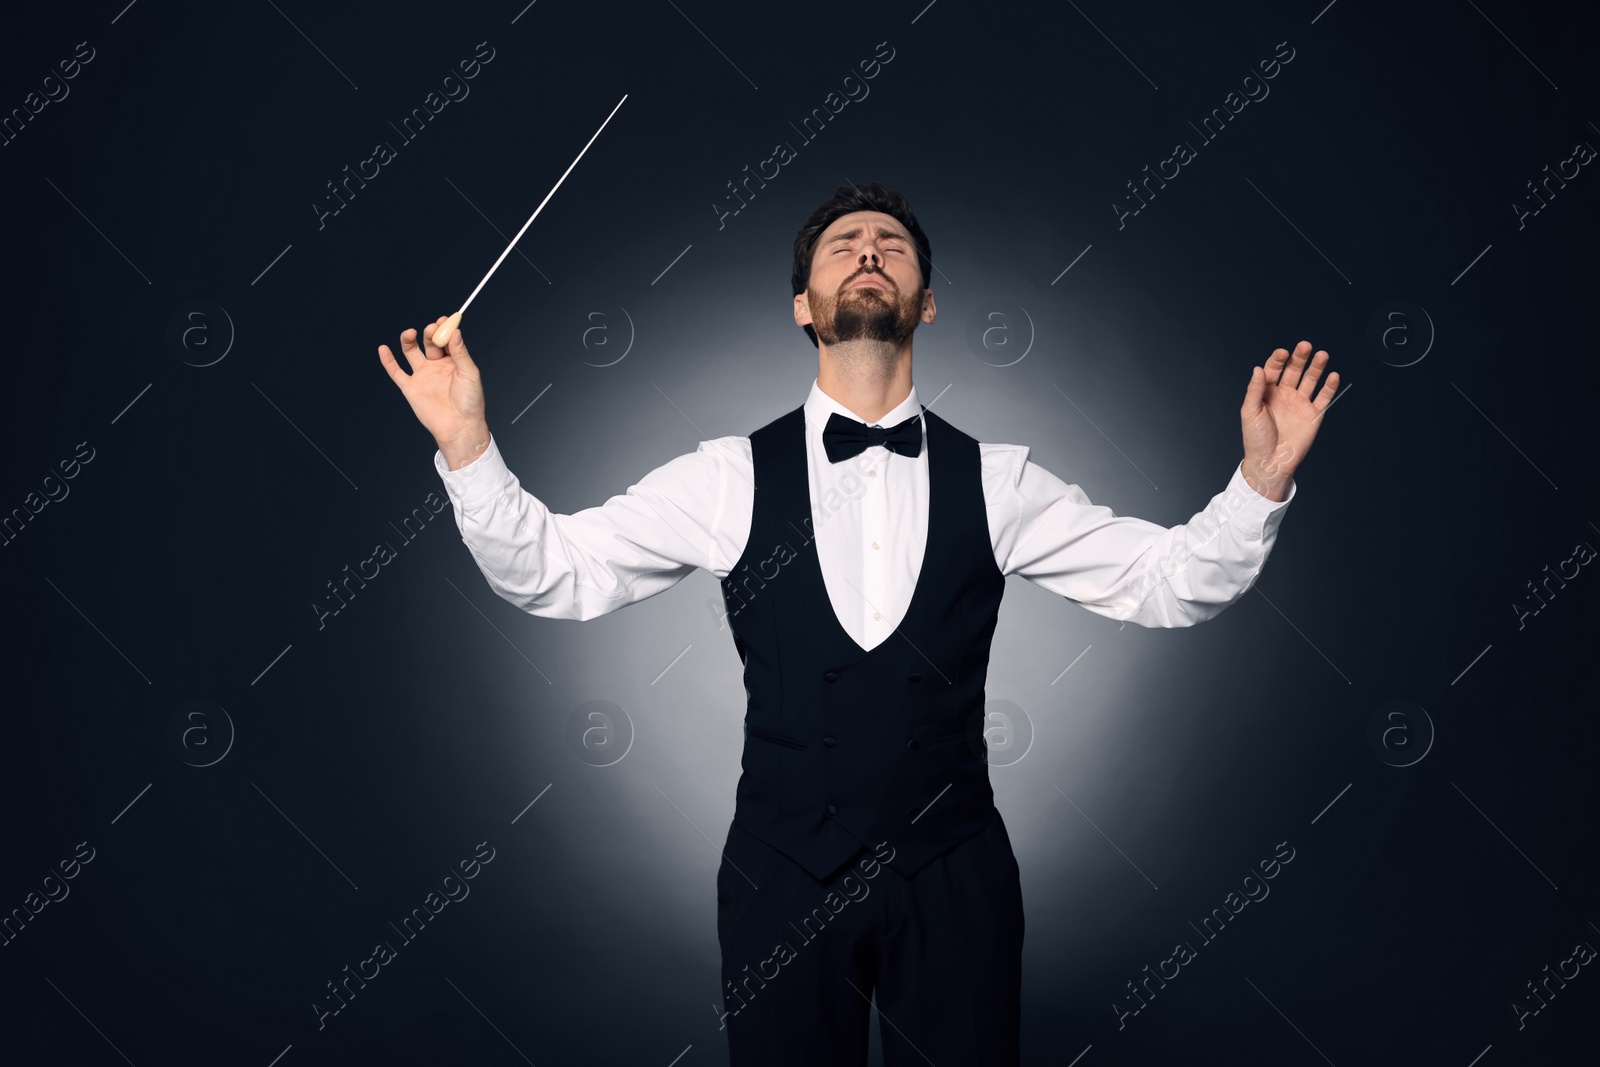 Photo of Professional conductor with baton on dark background